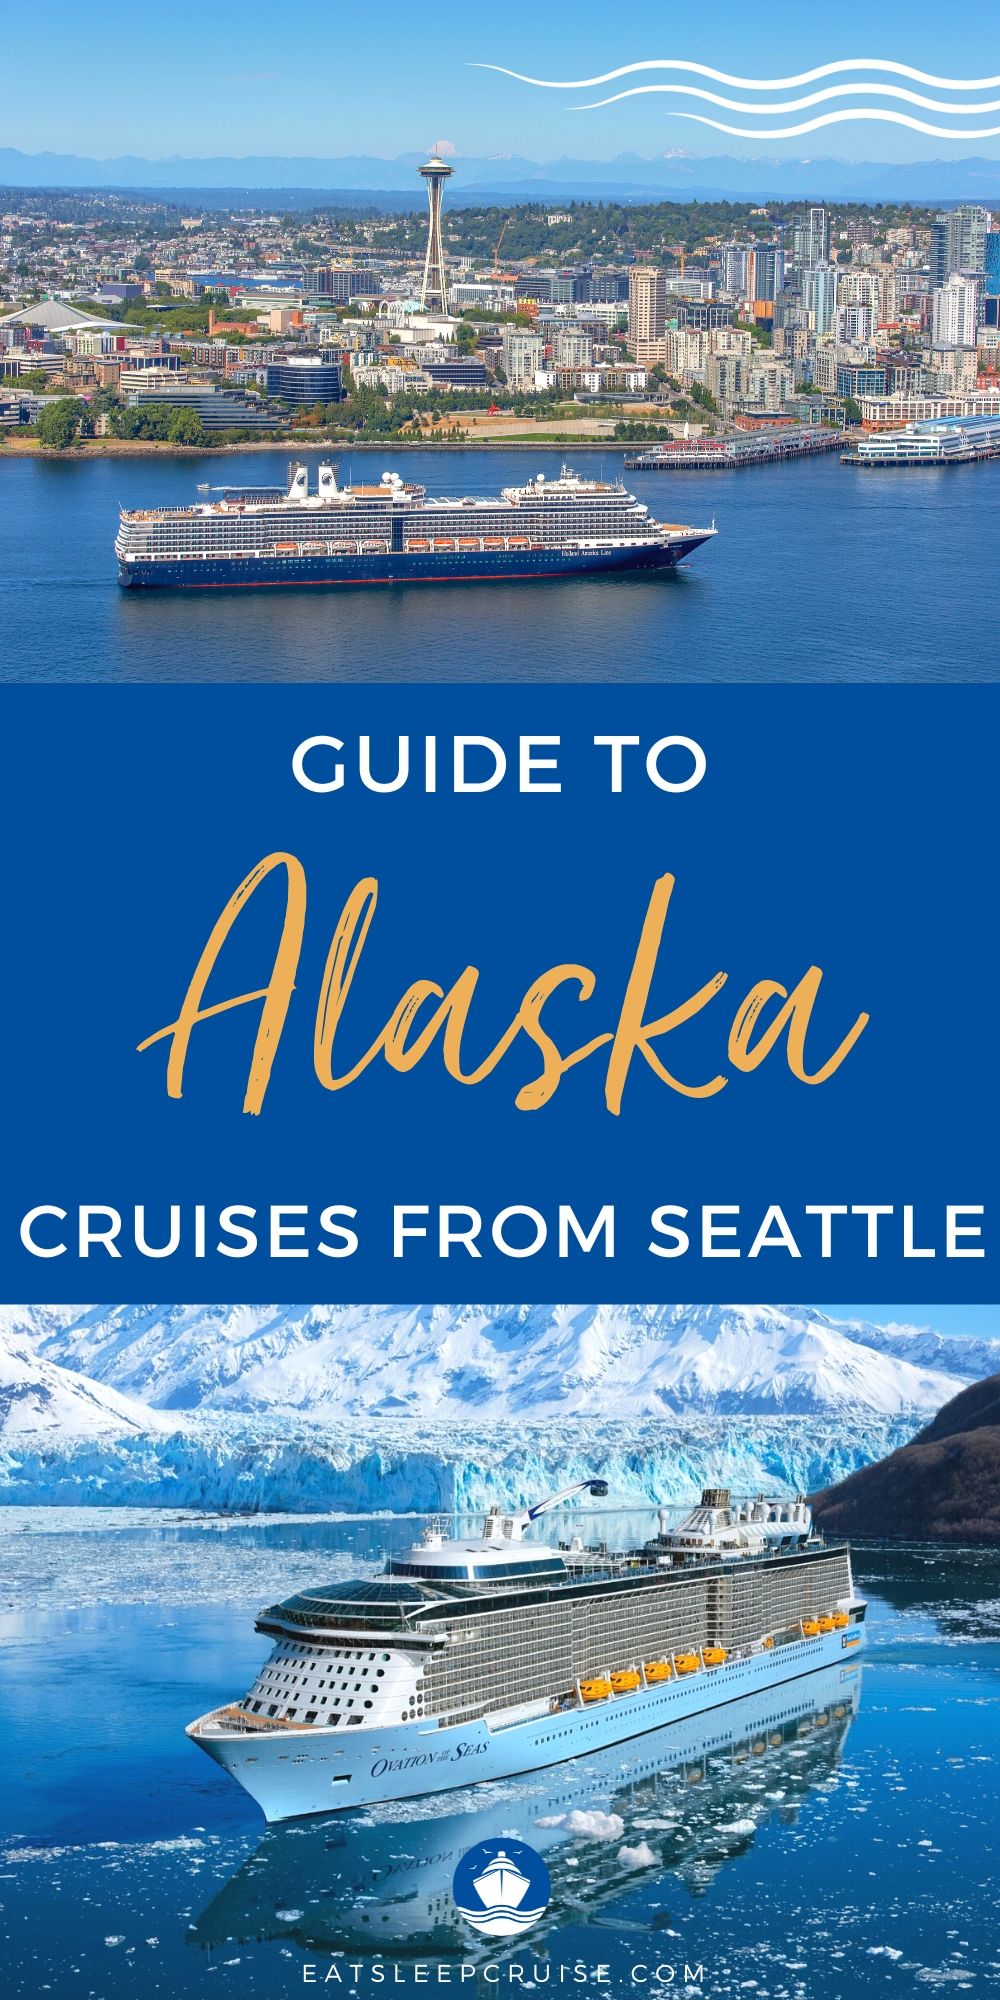 Want to Take an Alaska Cruise From Seattle? Here are the Top Cruise Picks